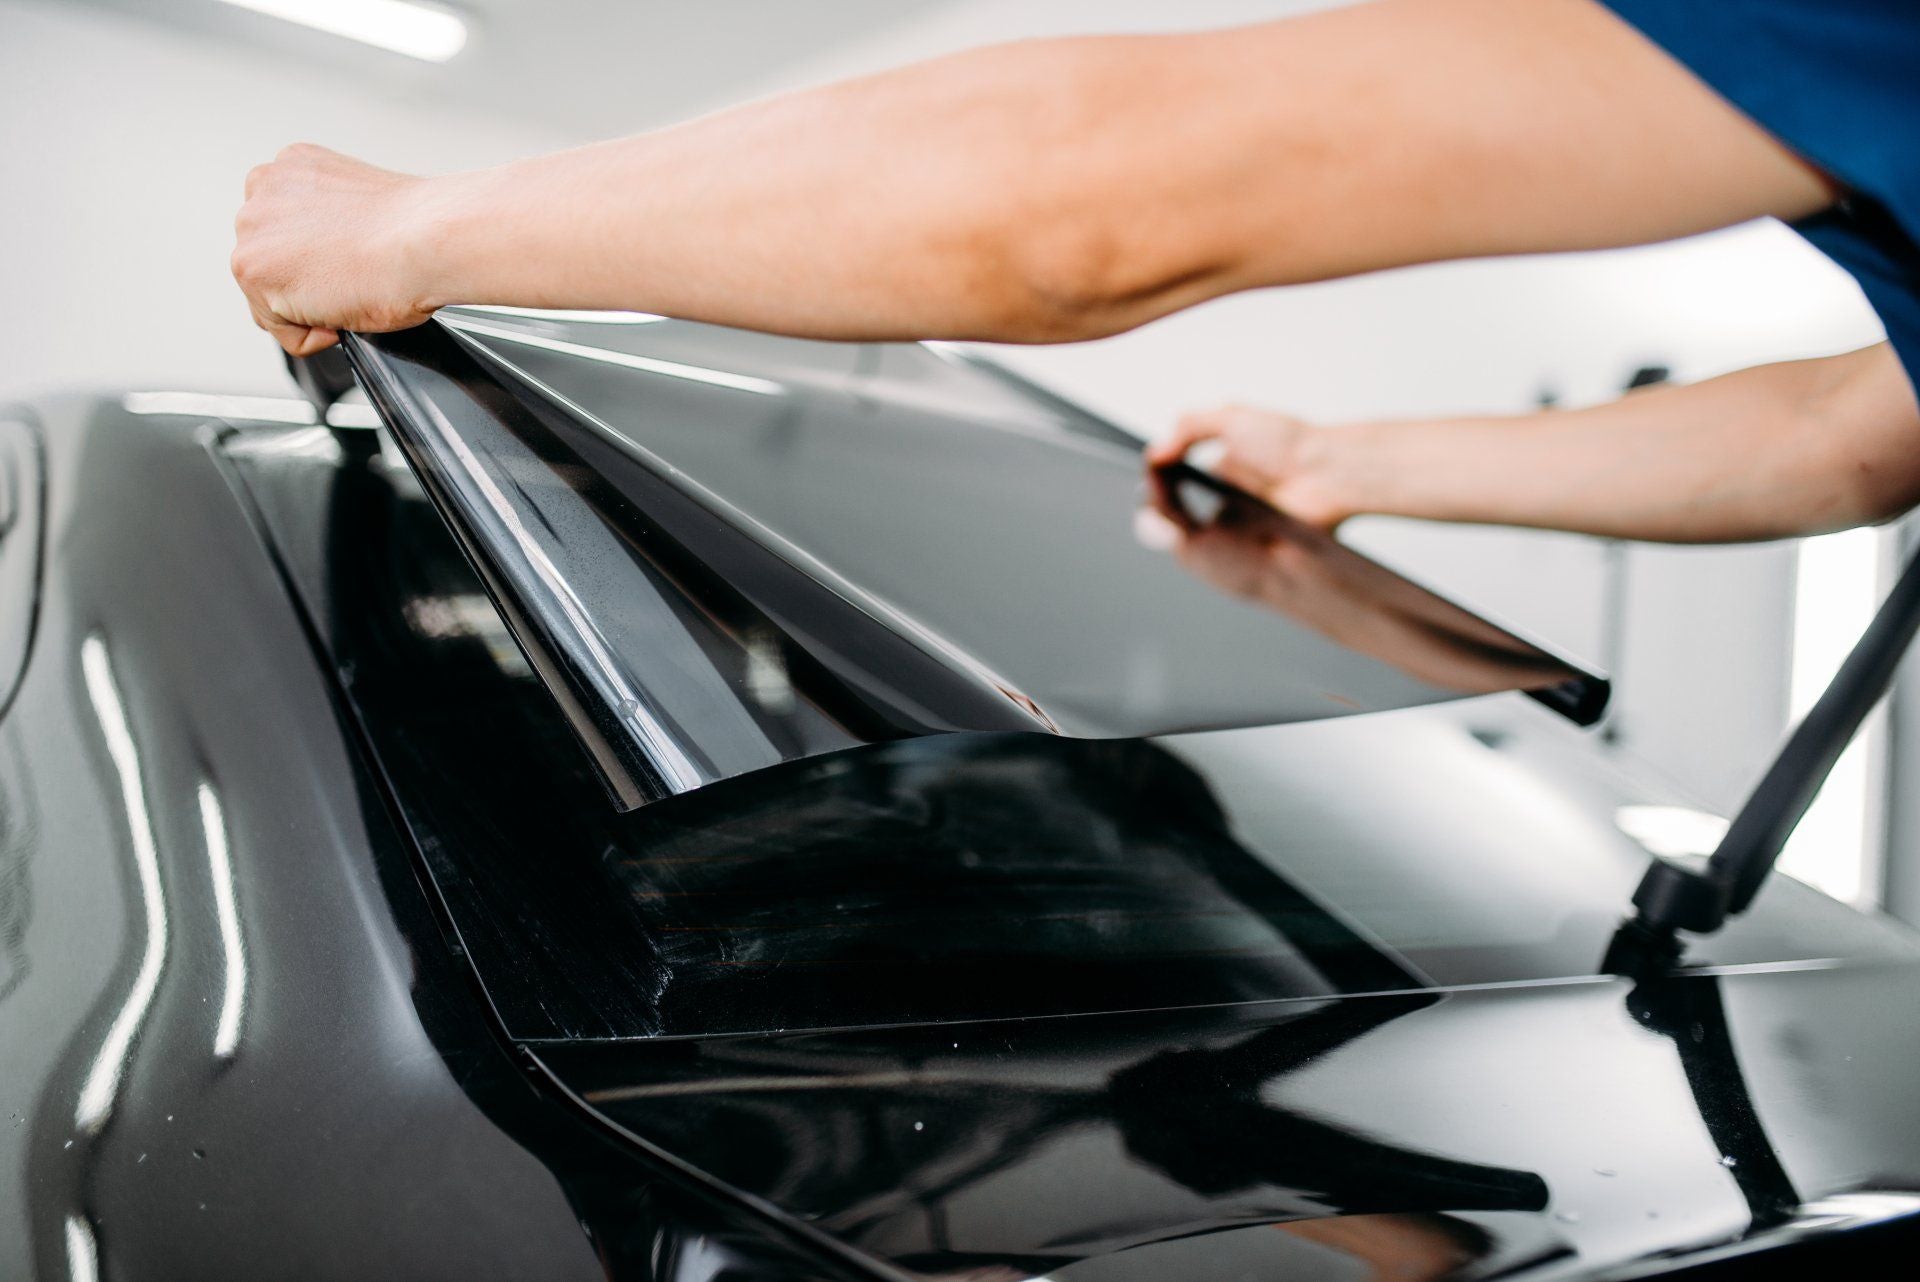 What to know before tinting windows?